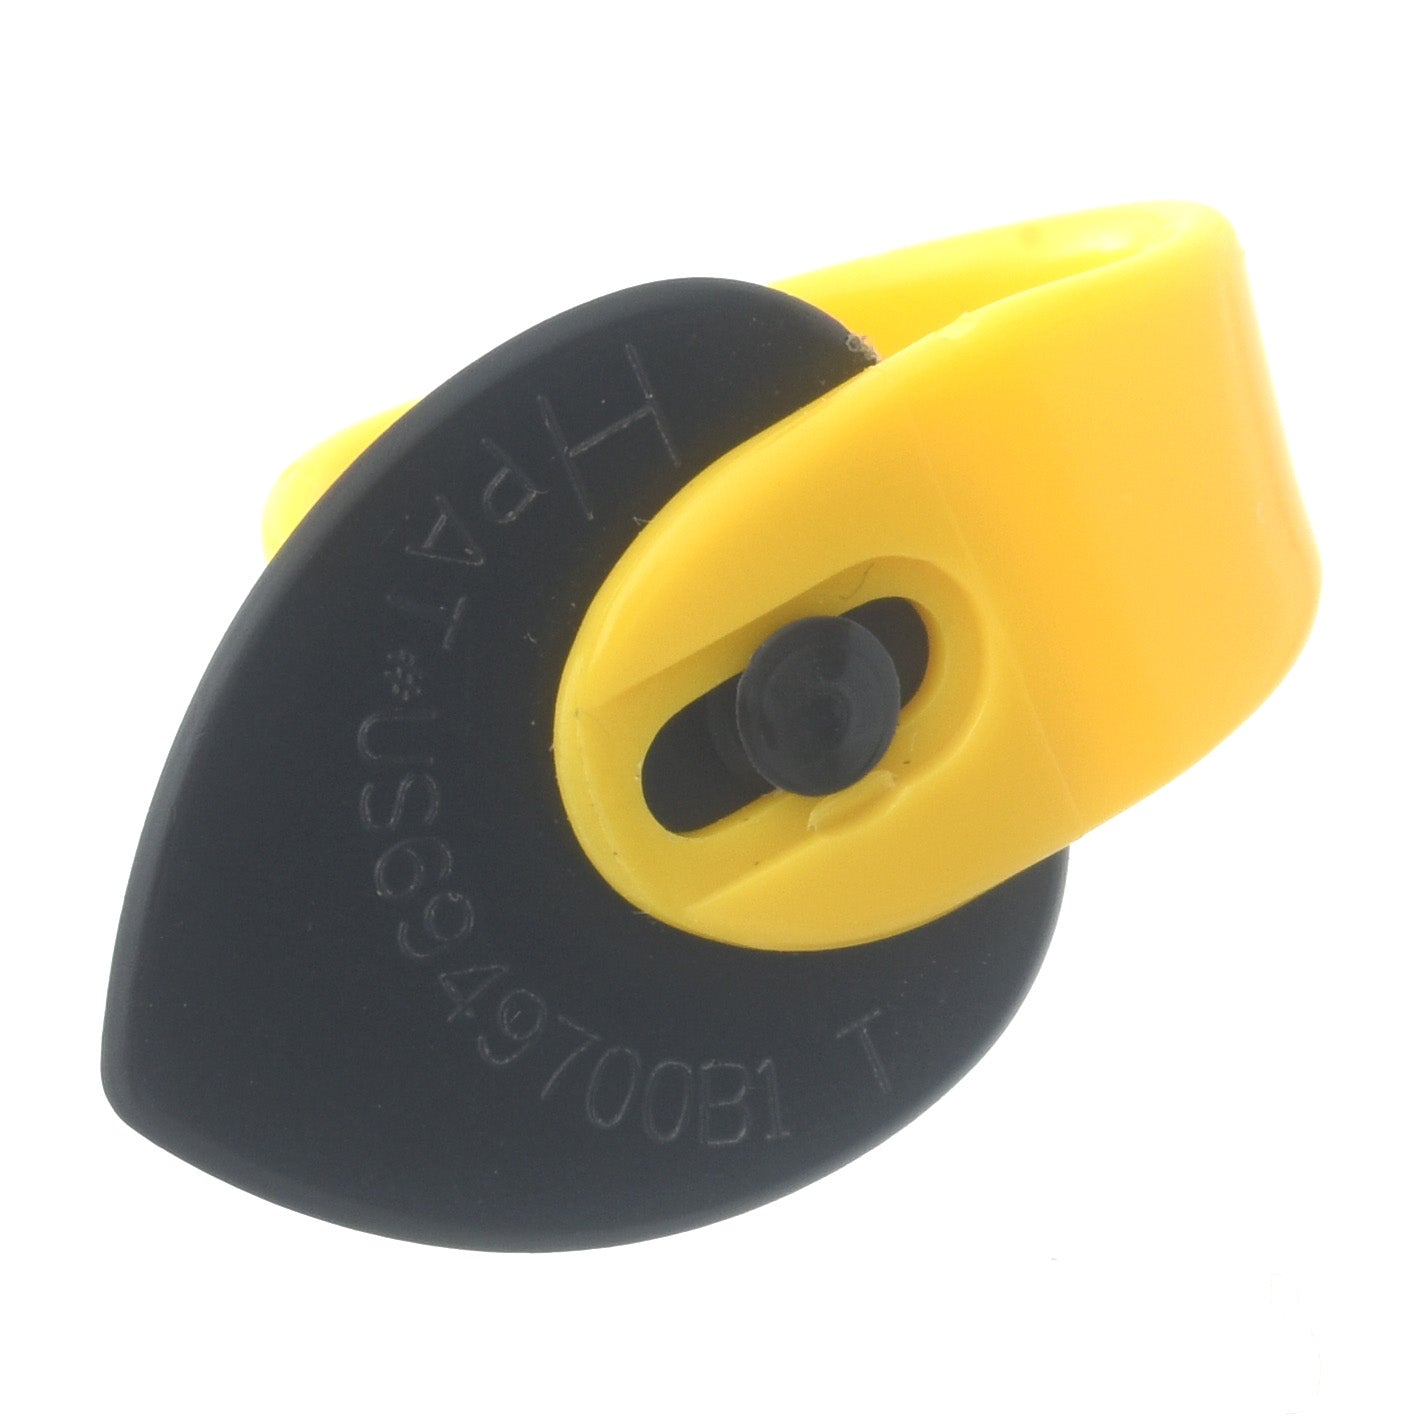 Image 2 of Fred Kelly Heavy Gauge Delrin Large Bumblebee Teardrop Pick - SKU# PKBTLG-H : Product Type Accessories & Parts : Elderly Instruments